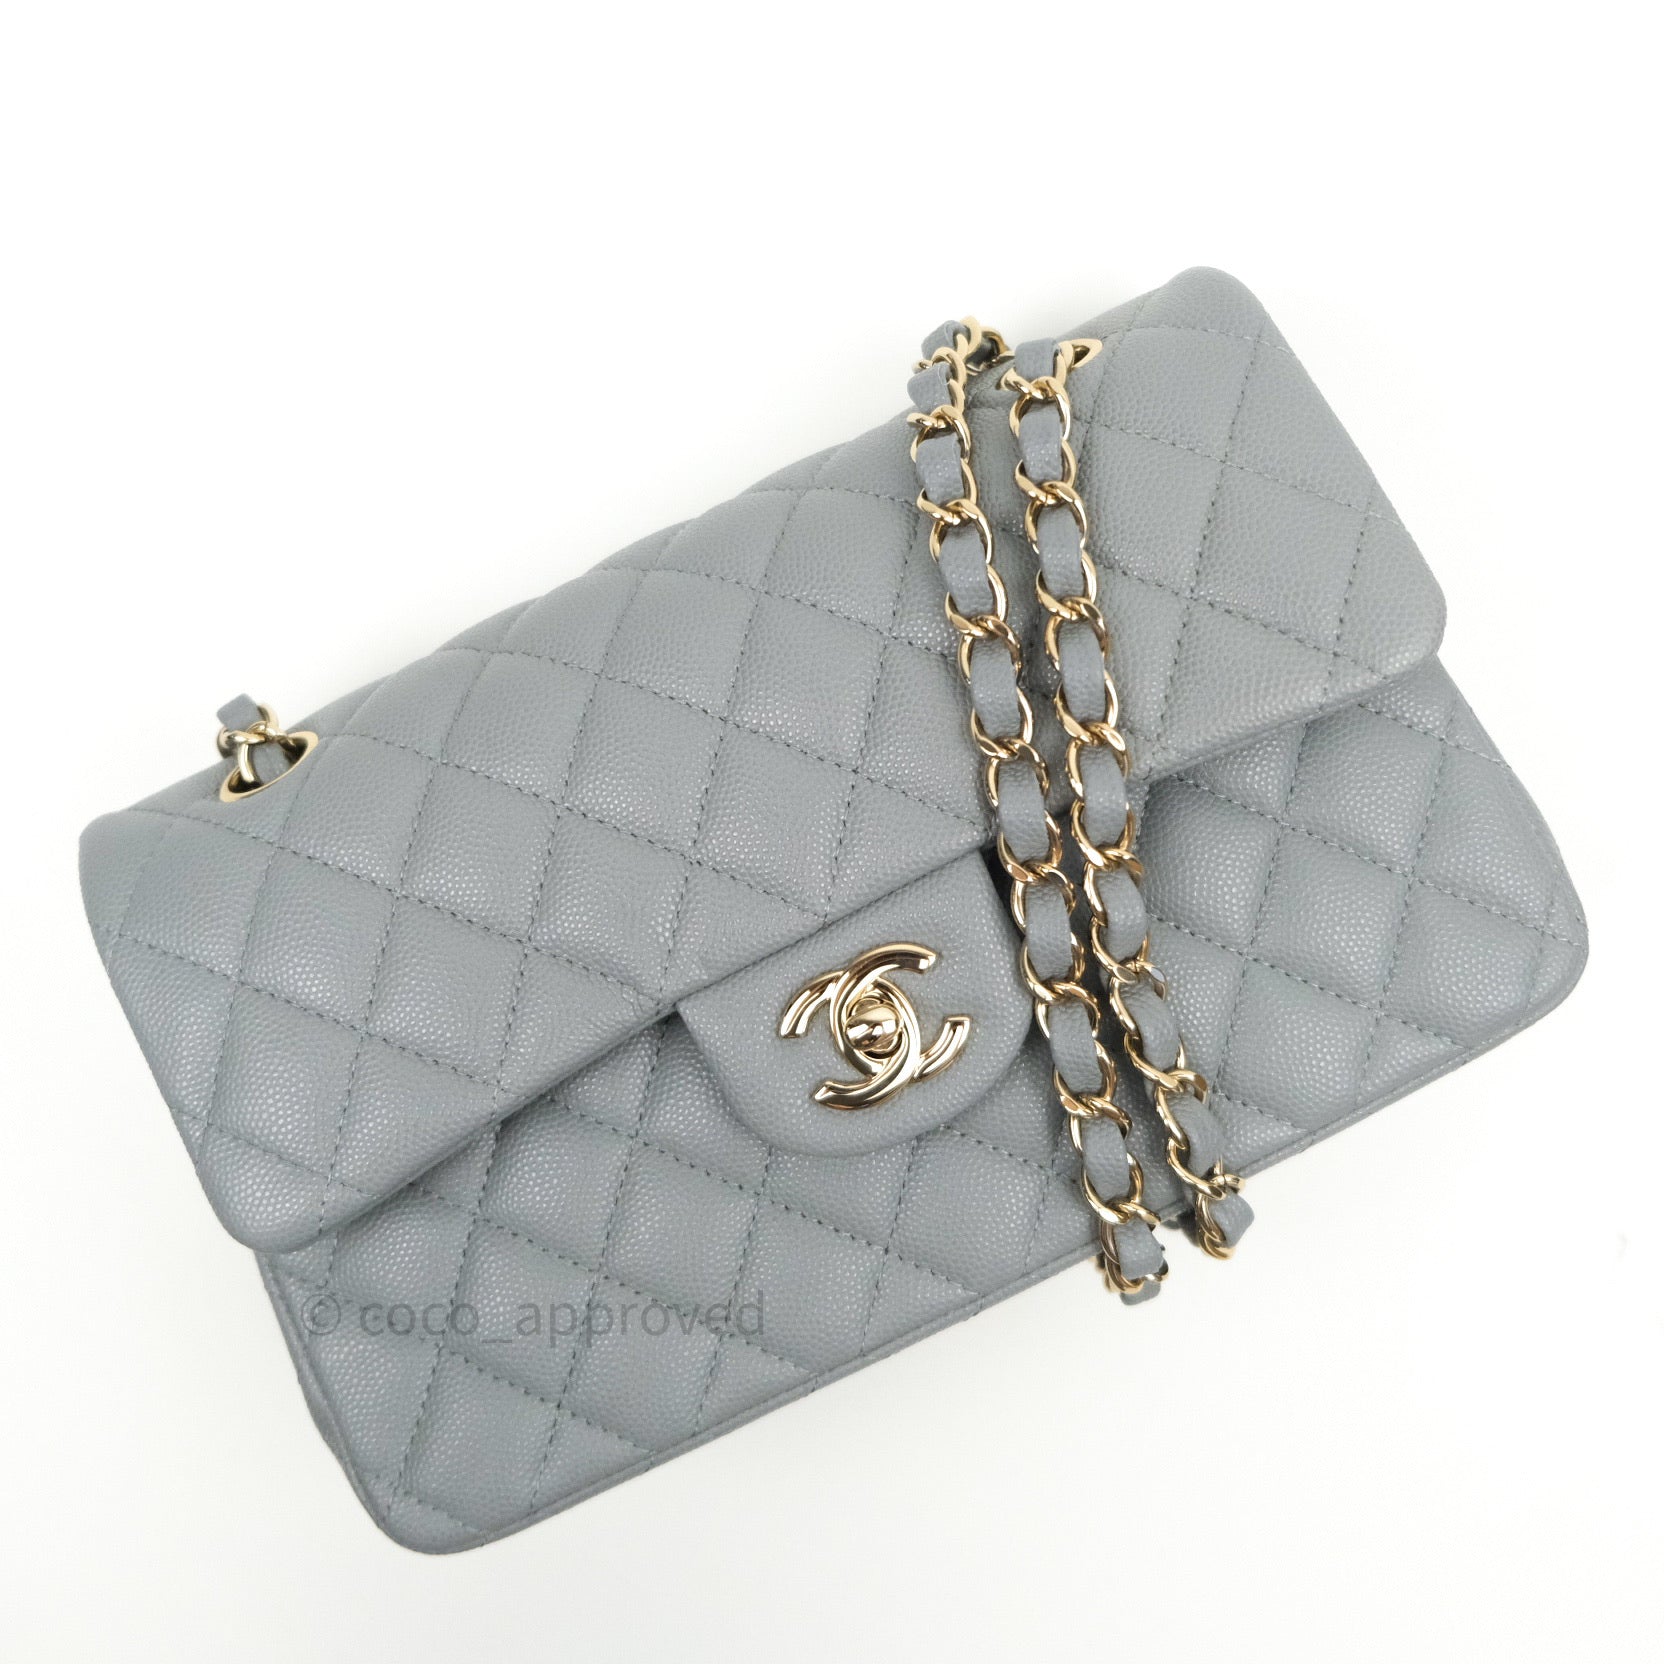 Authentic CHANEL GREY QUILTED LAMBSKIN LEATHER MAXI CLASSIC SINGLE FLAP BAG  Womens Fashion Bags  Wallets Purses  Pouches on Carousell